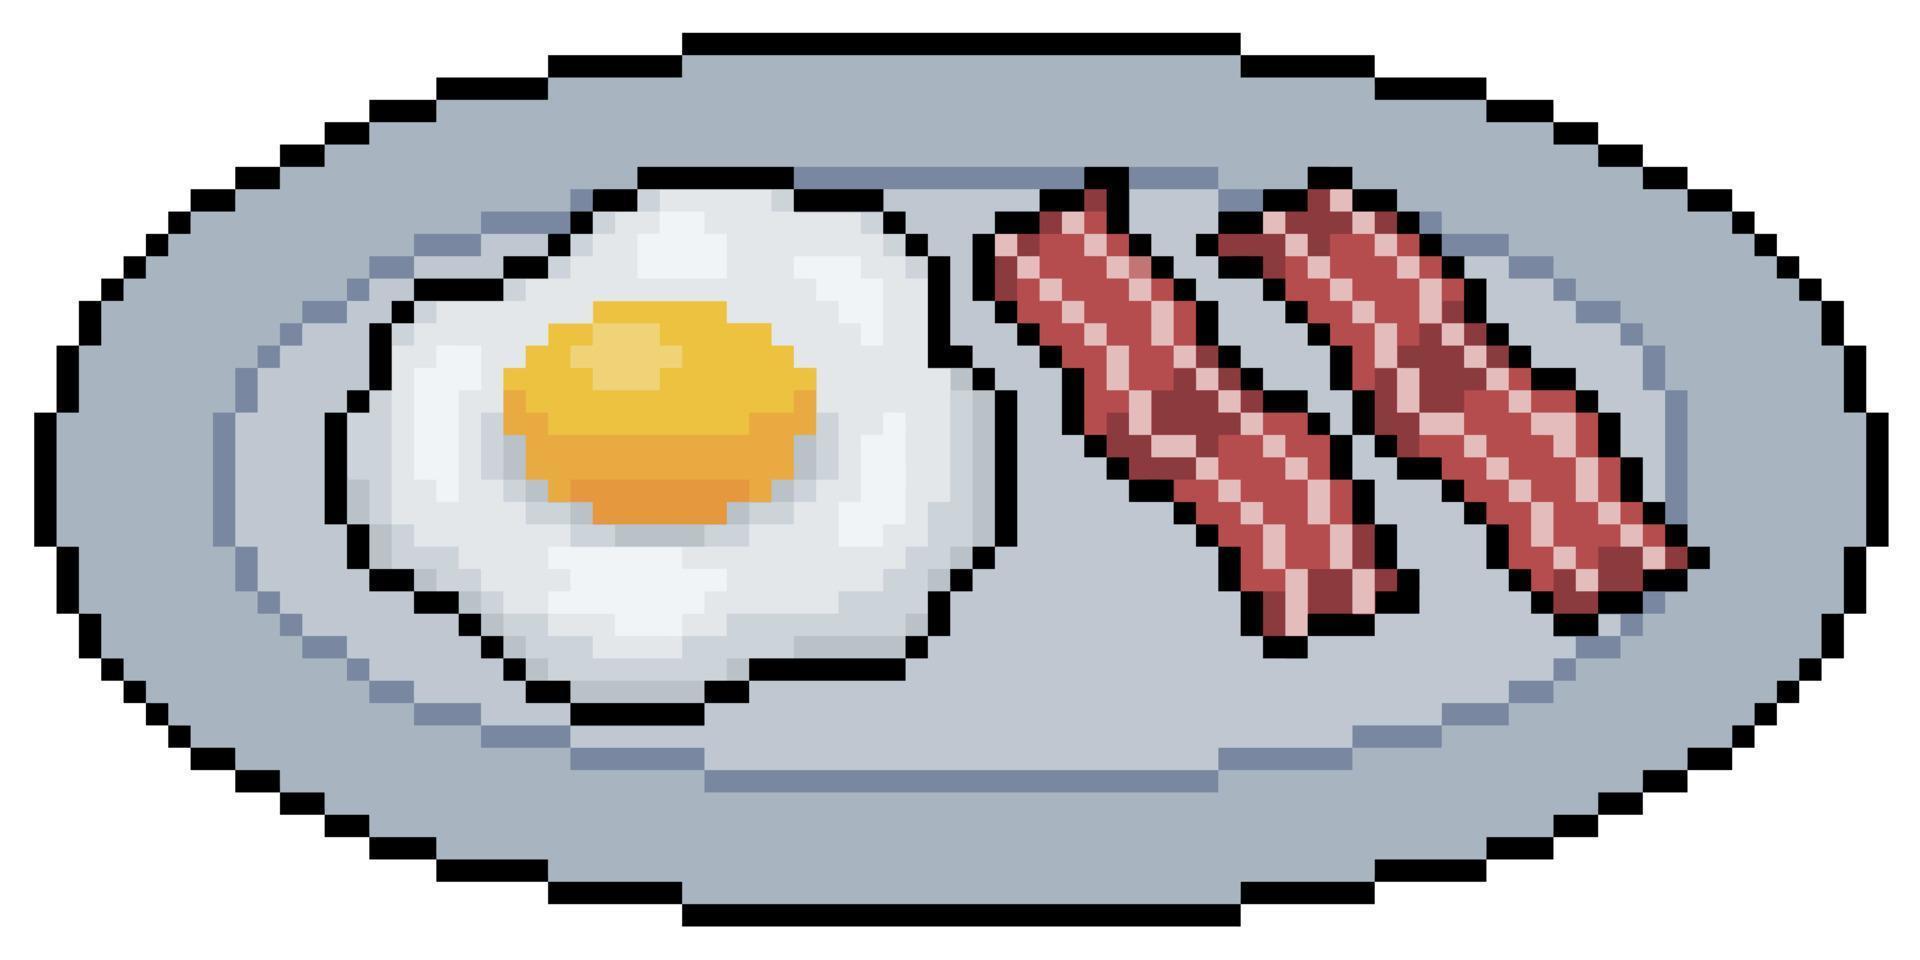 Pixel art Eggs with bacon. American breakfast vector icon for 8bit game on white background